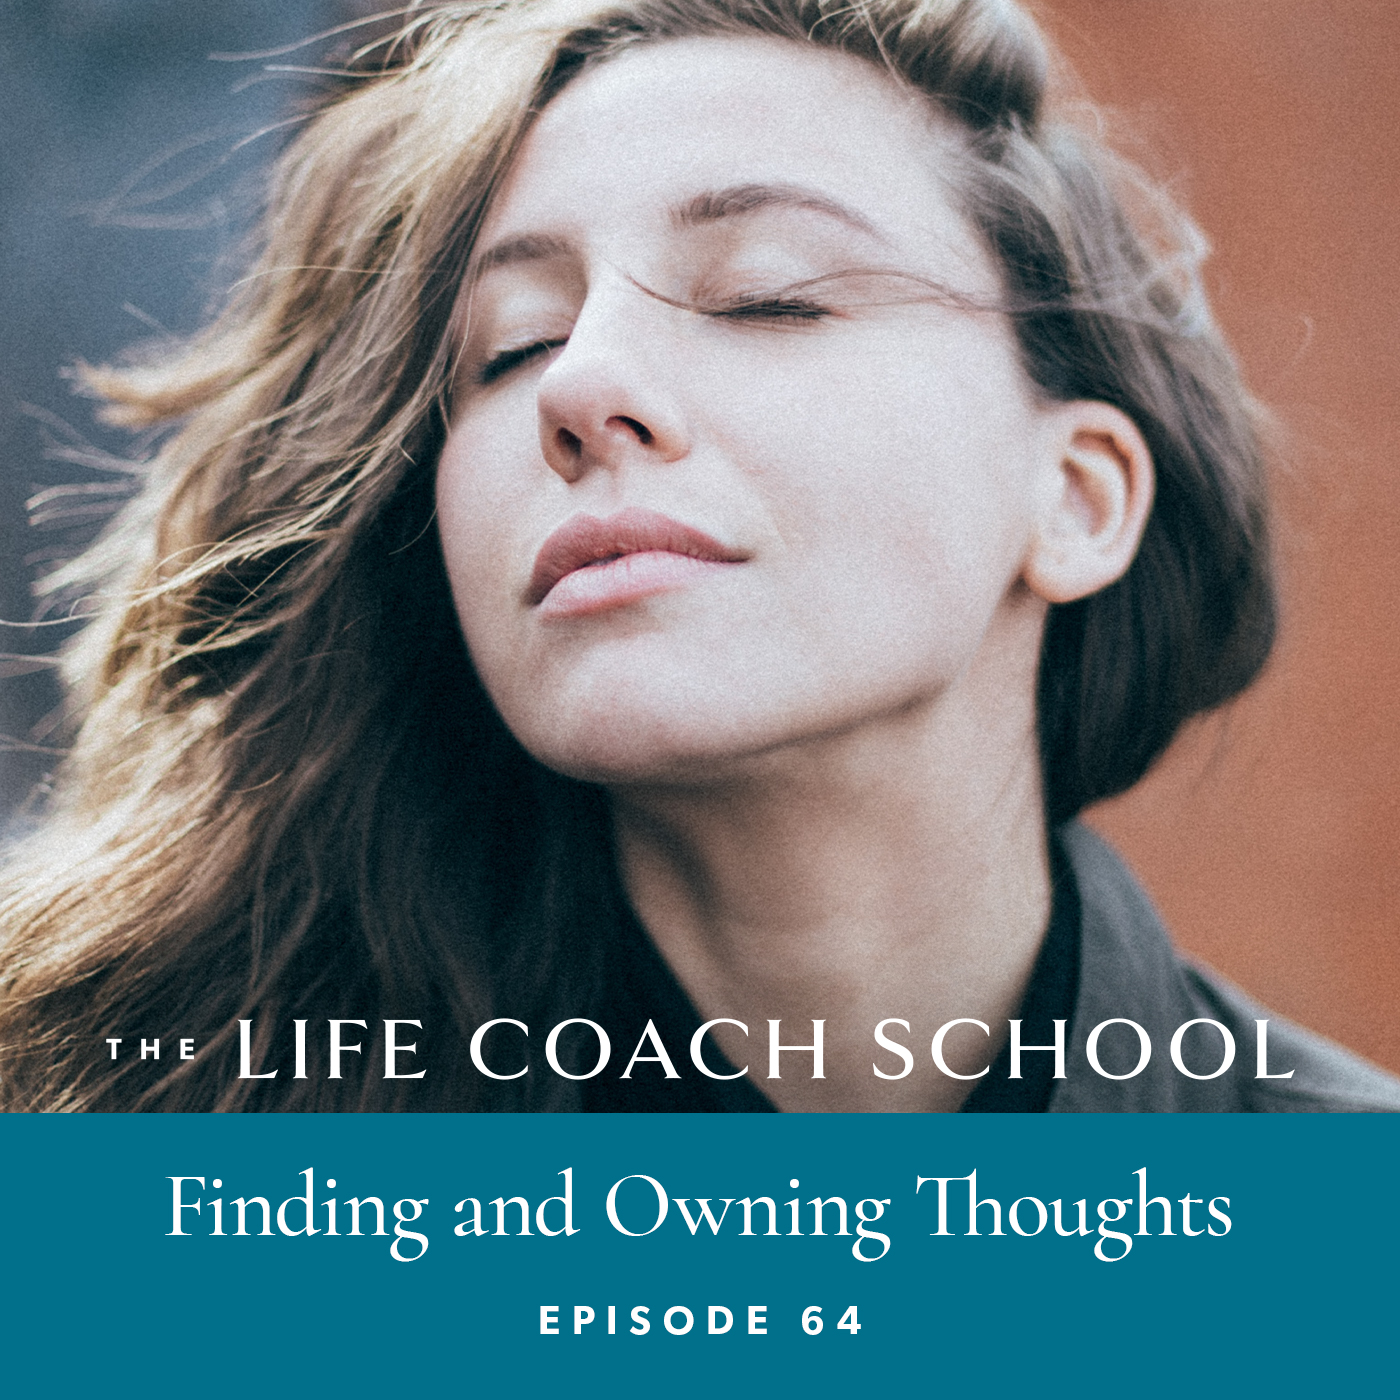 The Life Coach School Podcast with Brooke Castillo | Episode 64 | Finding and Owning Thoughts